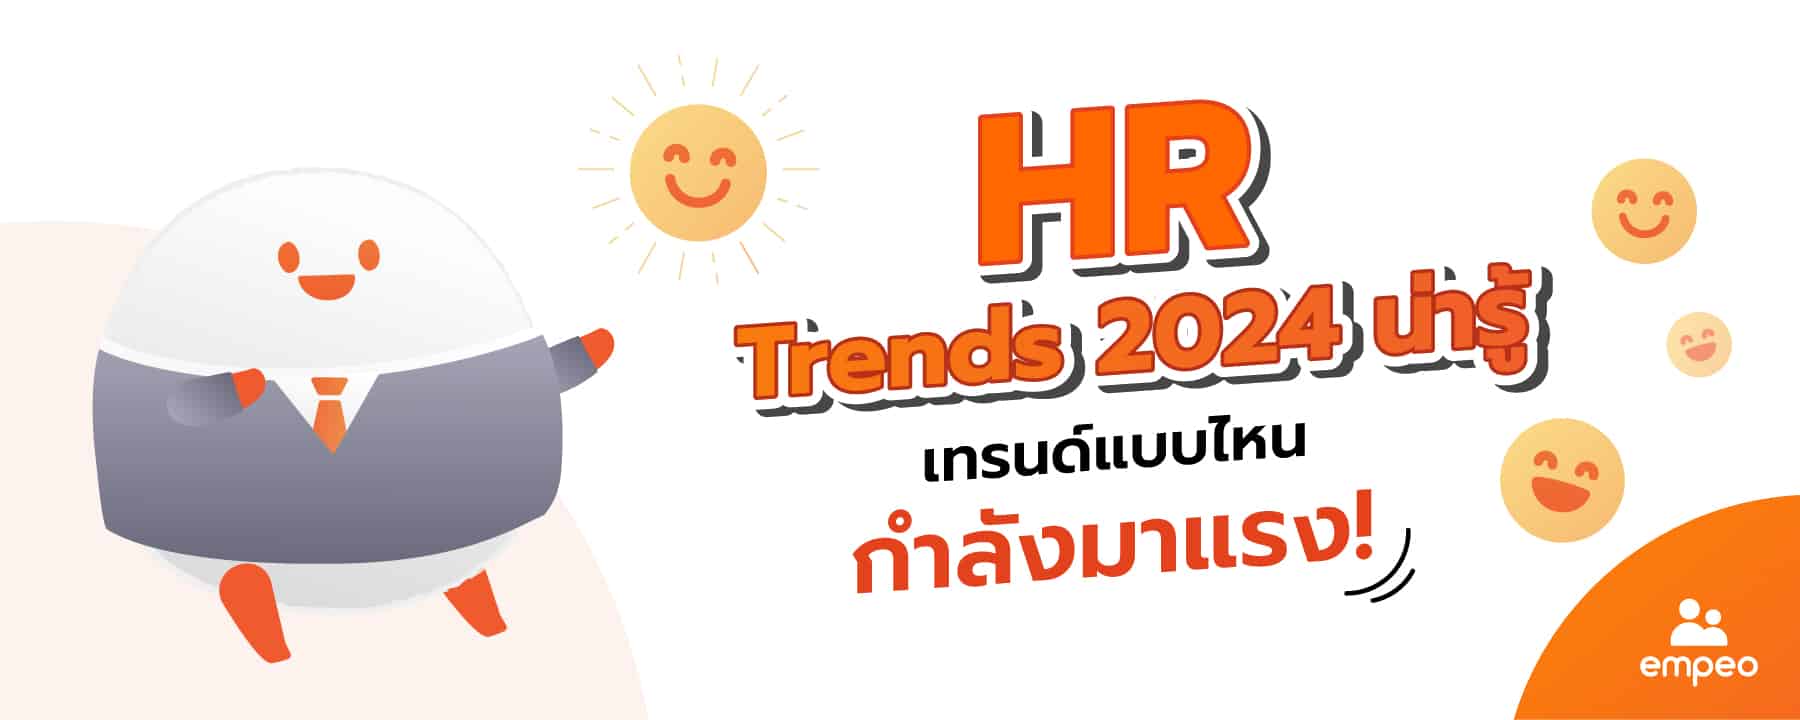 empeo and HR trends 2024